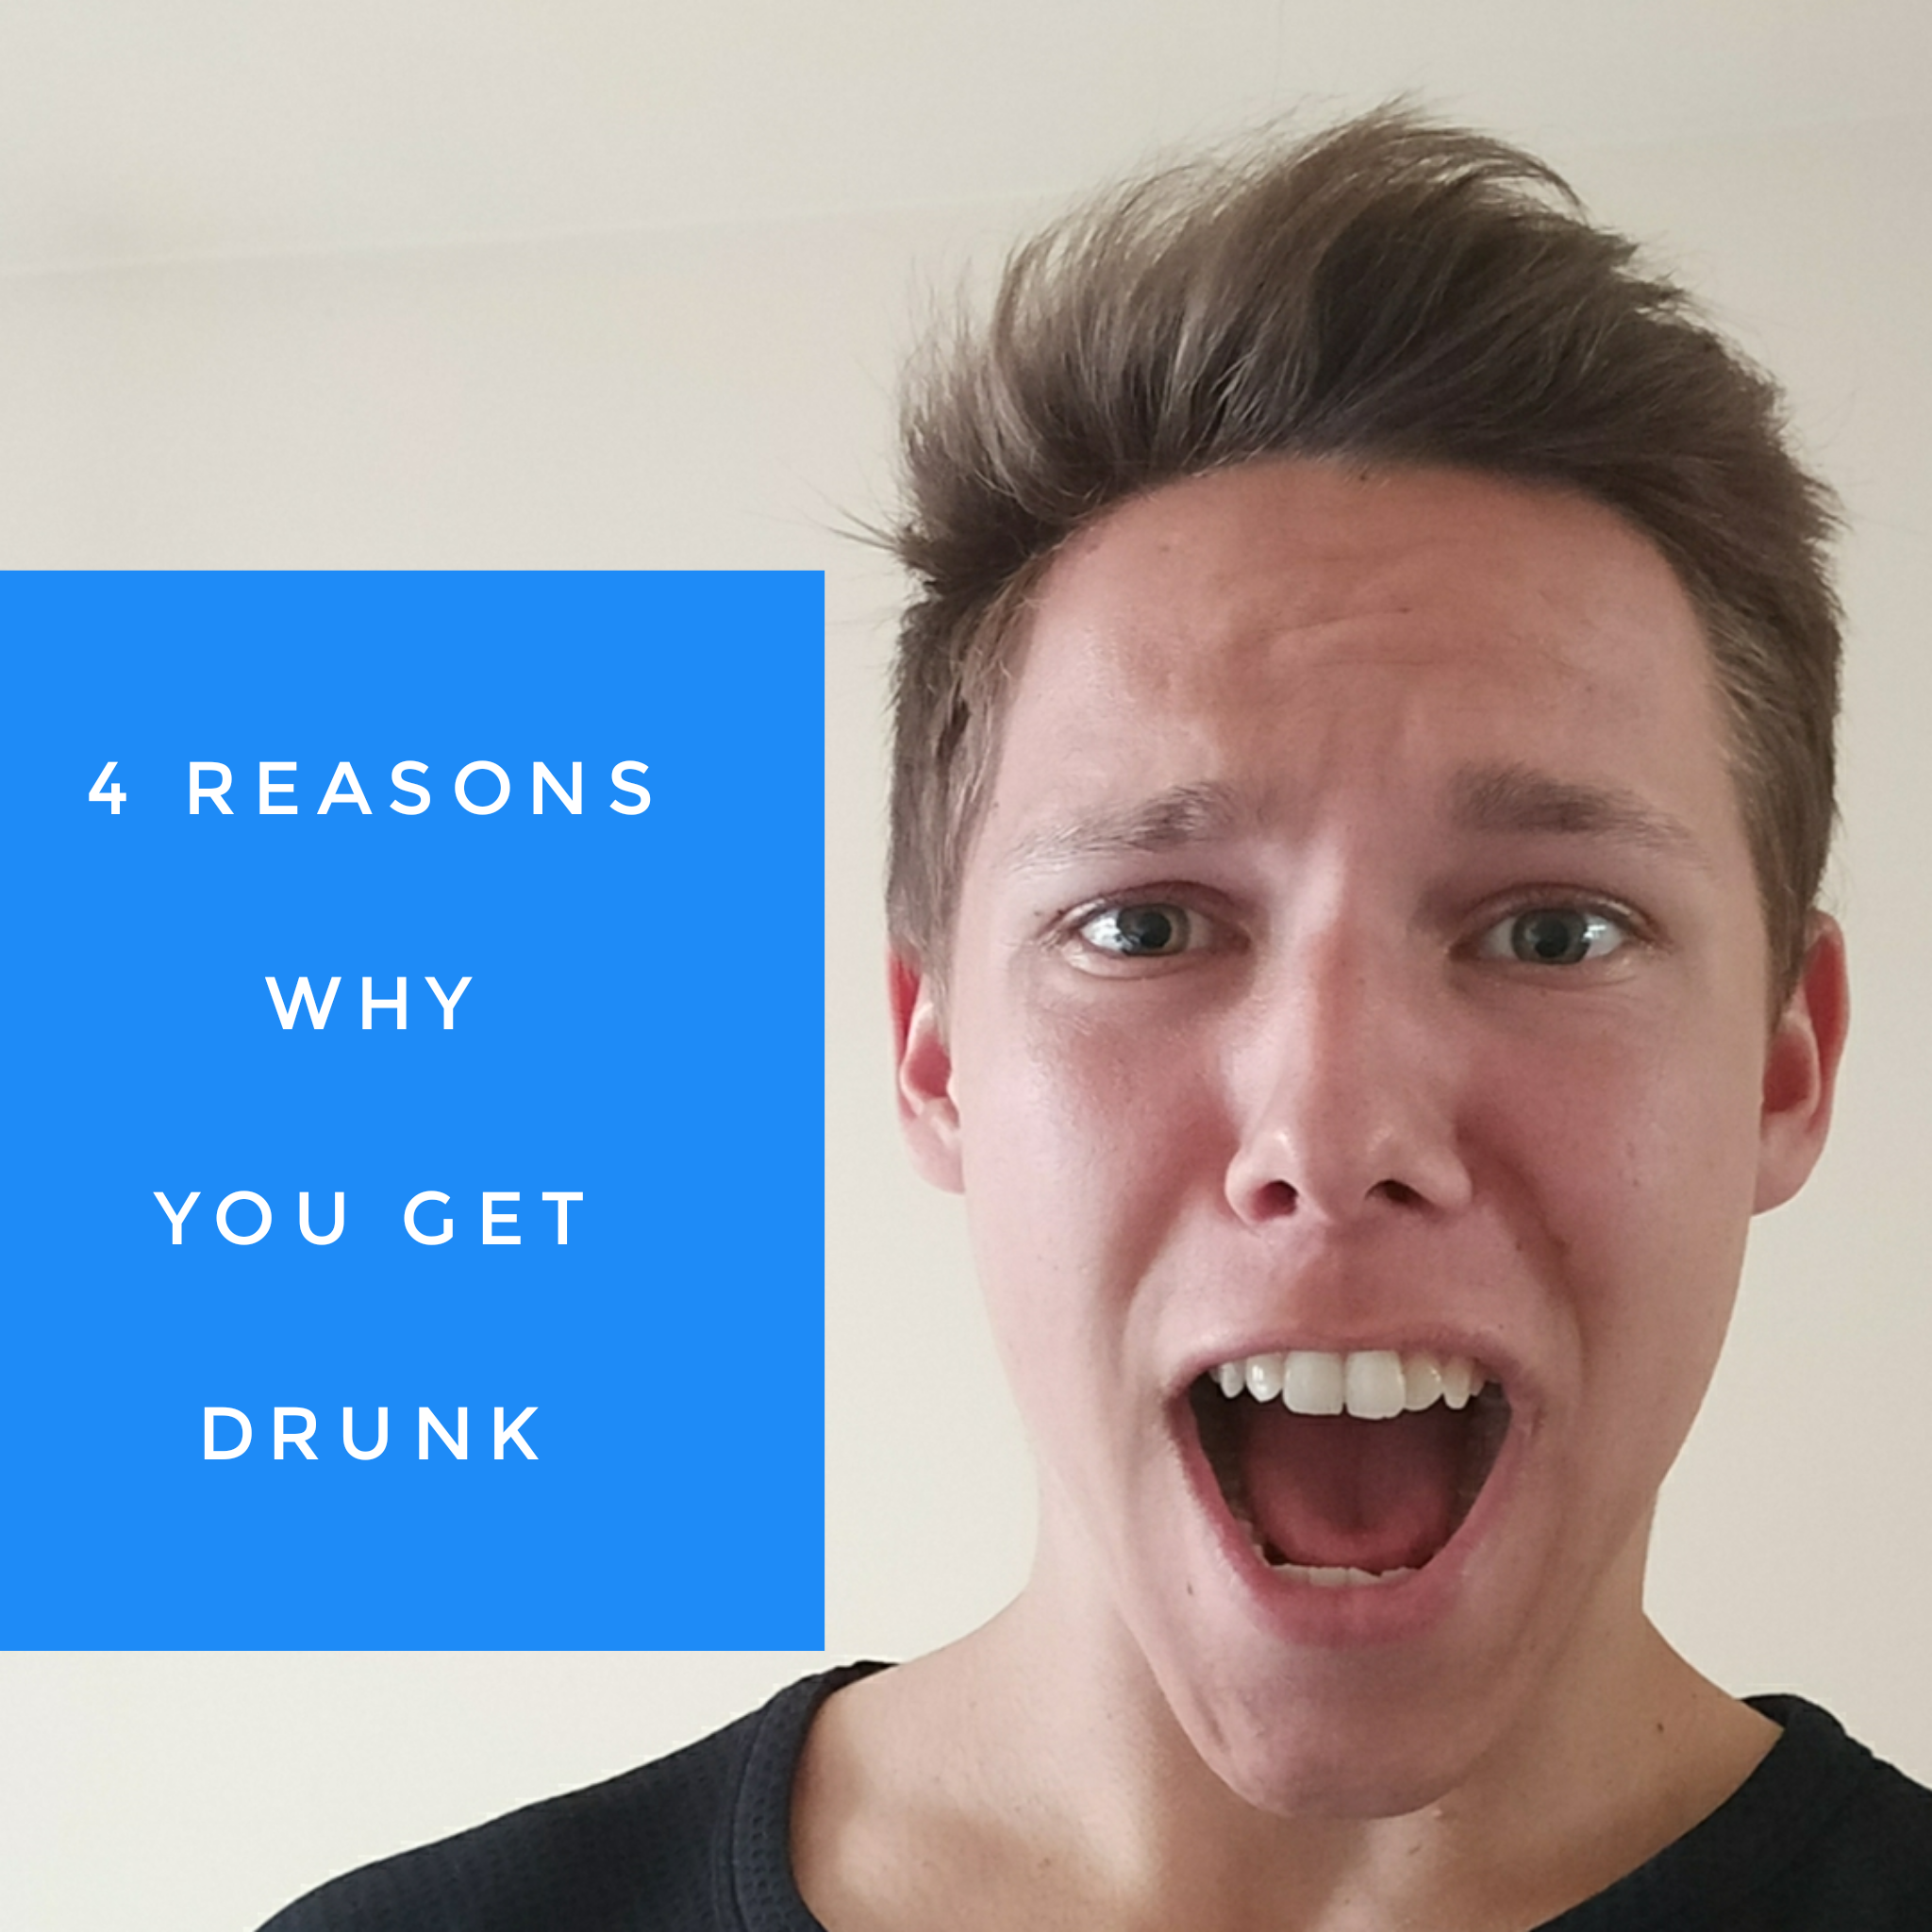 4 reasons why you get drunk